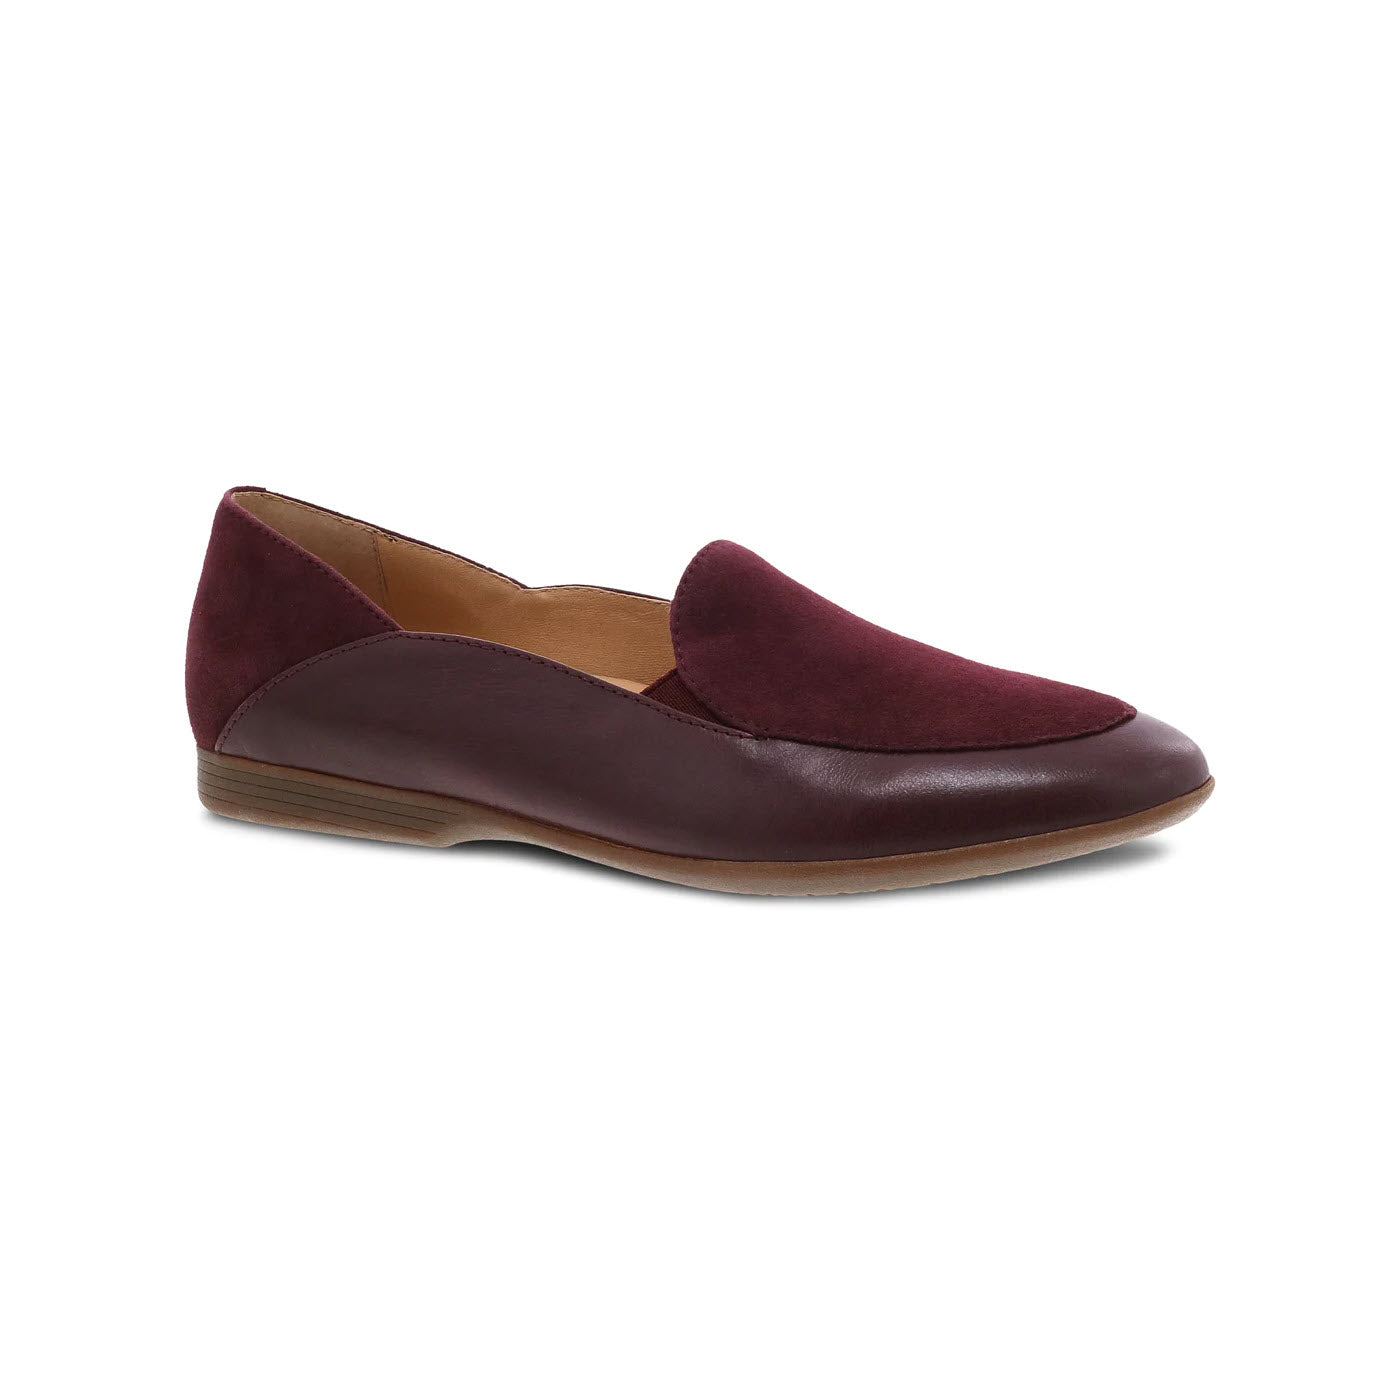 A burgundy Dansko lace wine glazed women's loafer featuring a velvety upper and a smooth, buttery soft leather toe, displayed against a white background.